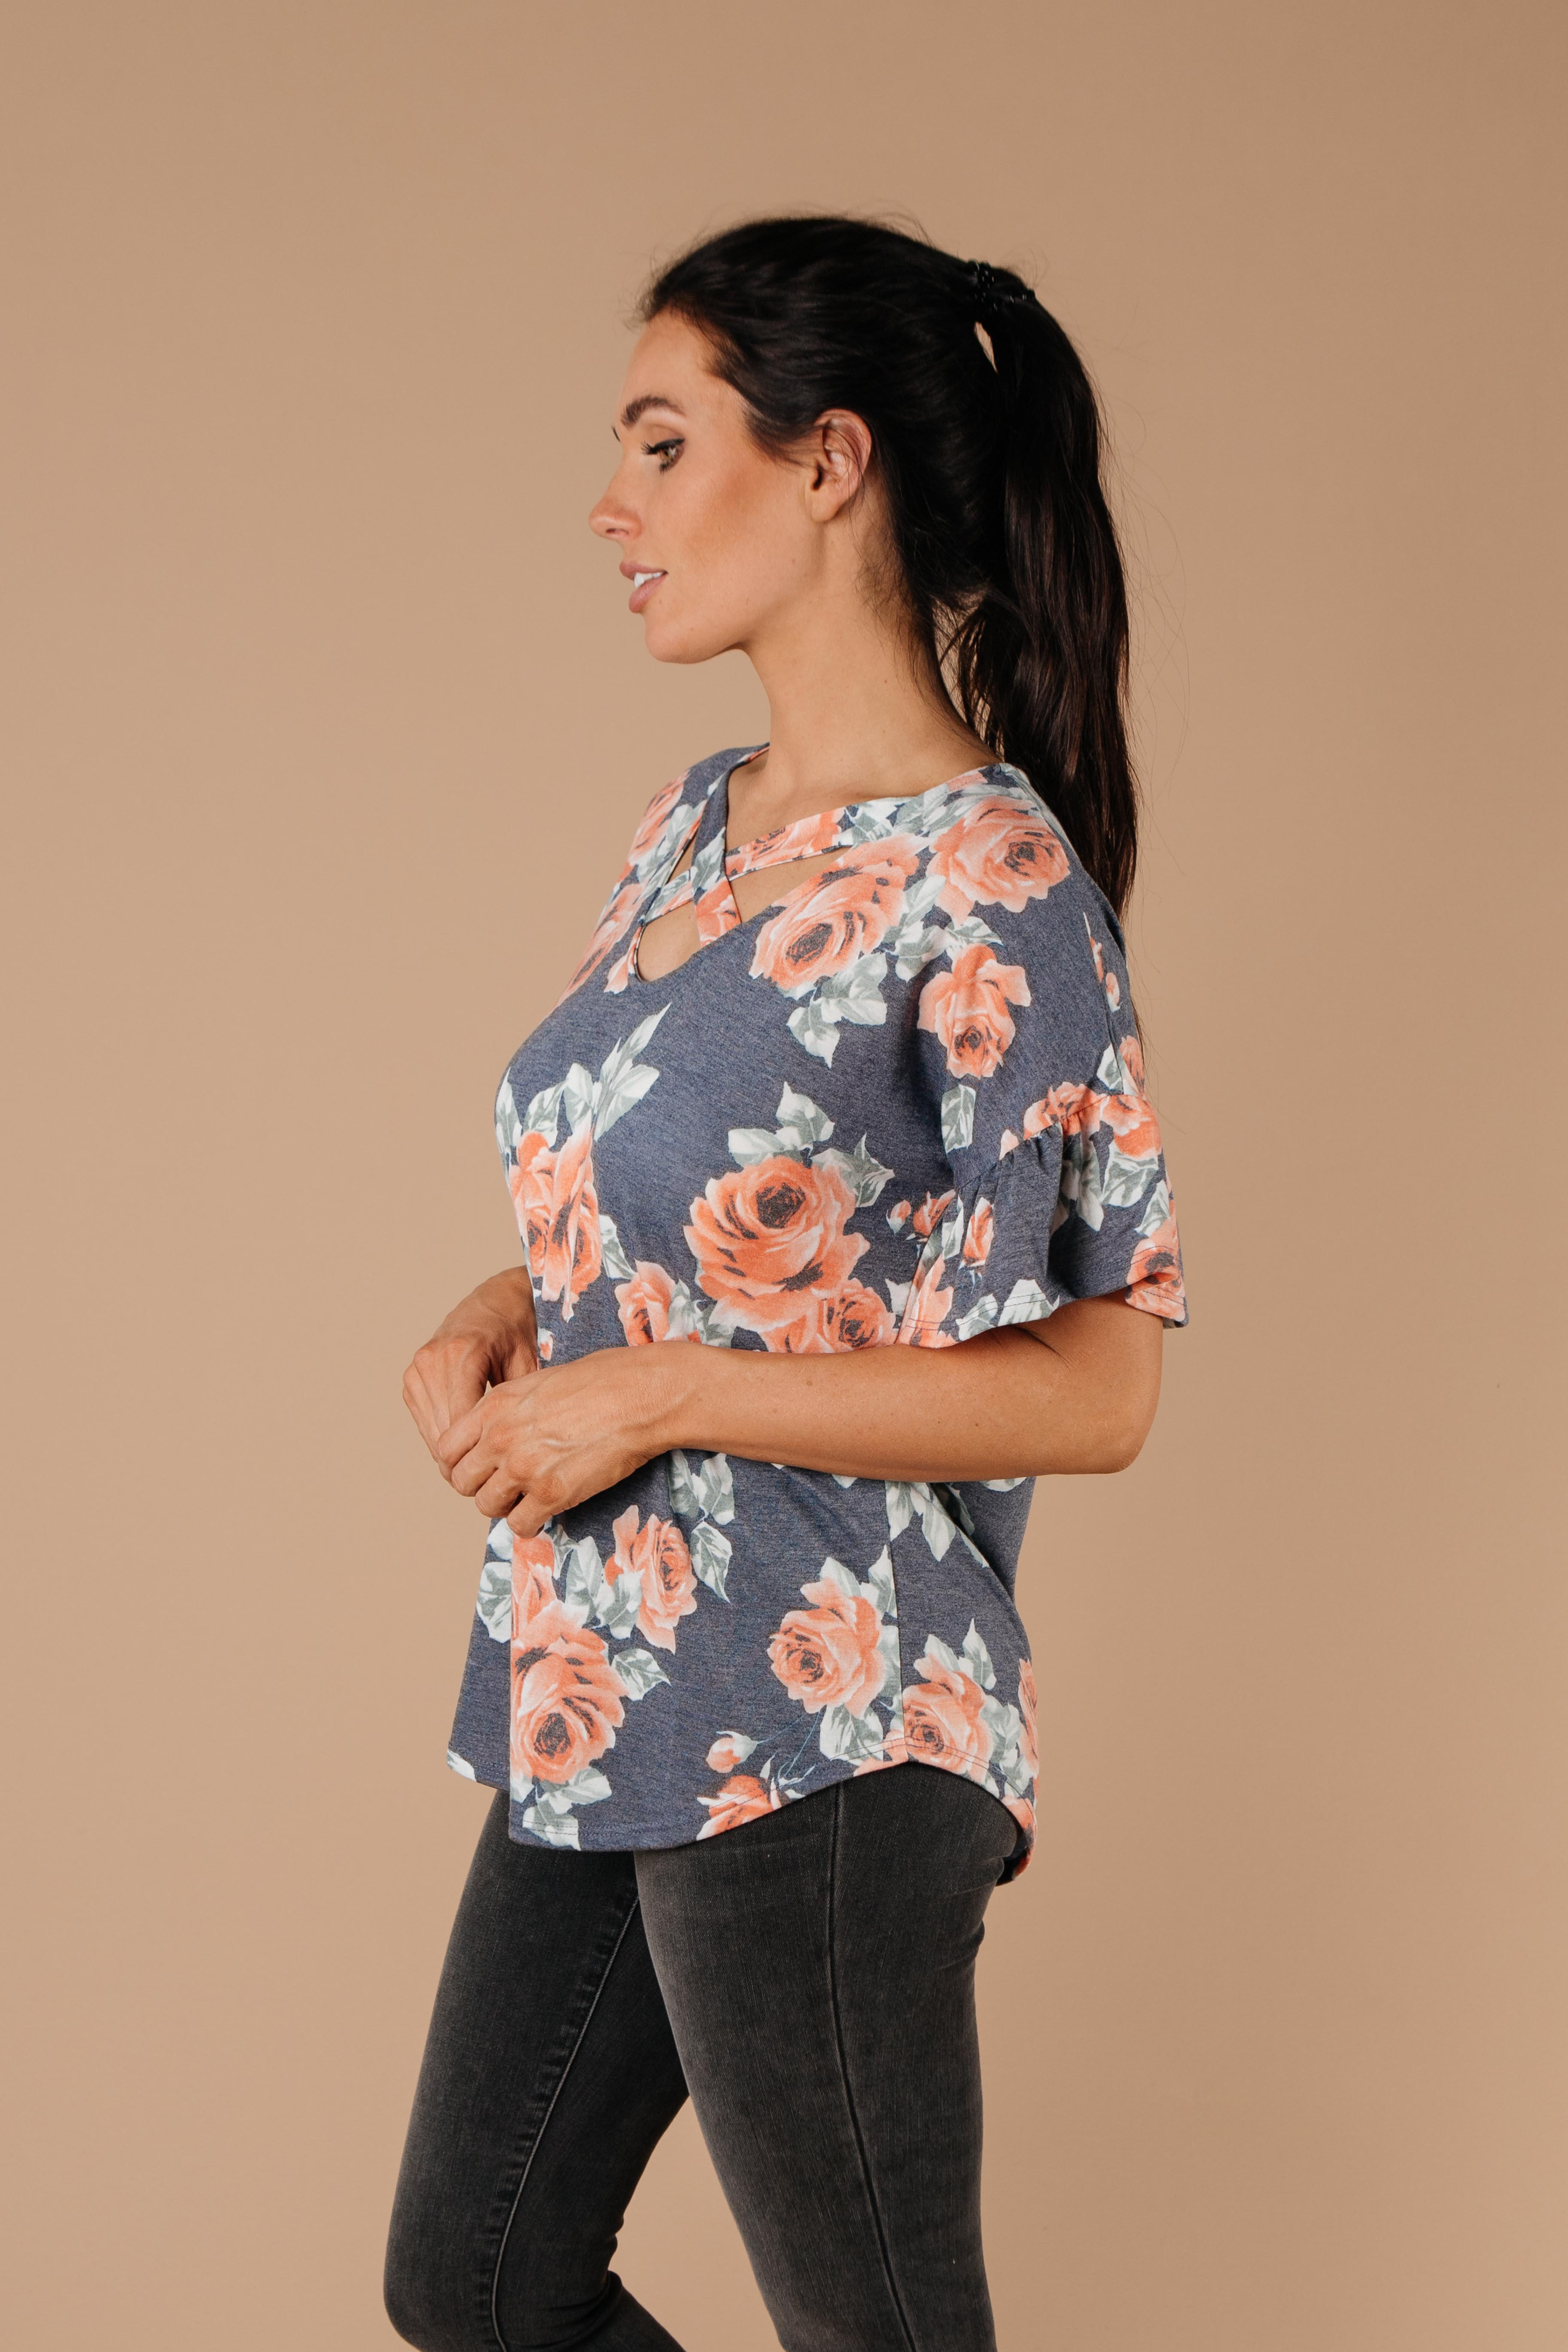 Southern Charm Floral Top